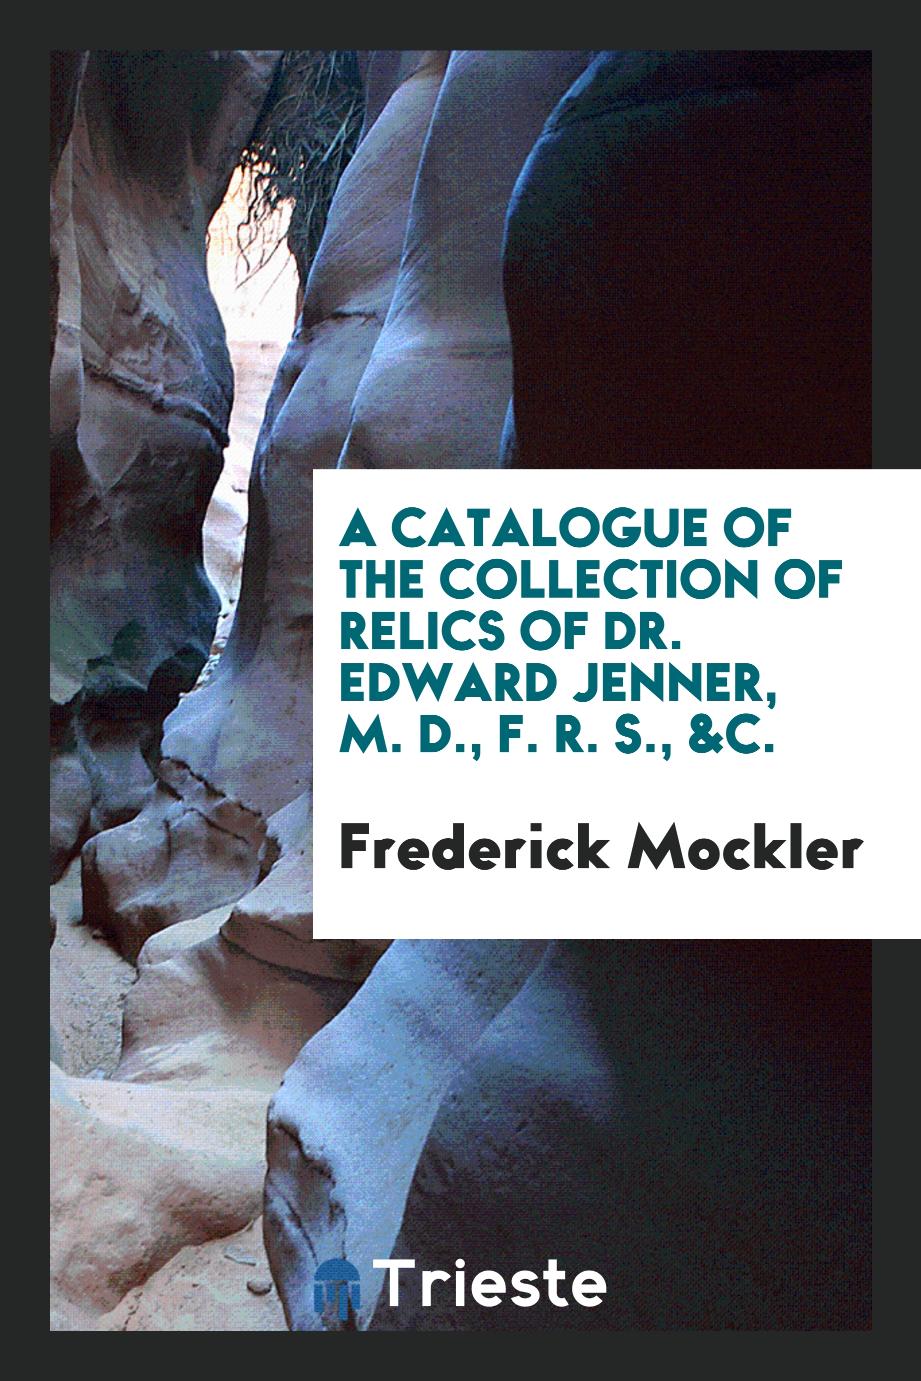 A Catalogue of the Collection of Relics of Dr. Edward Jenner, M. D., F. R. S., &c.